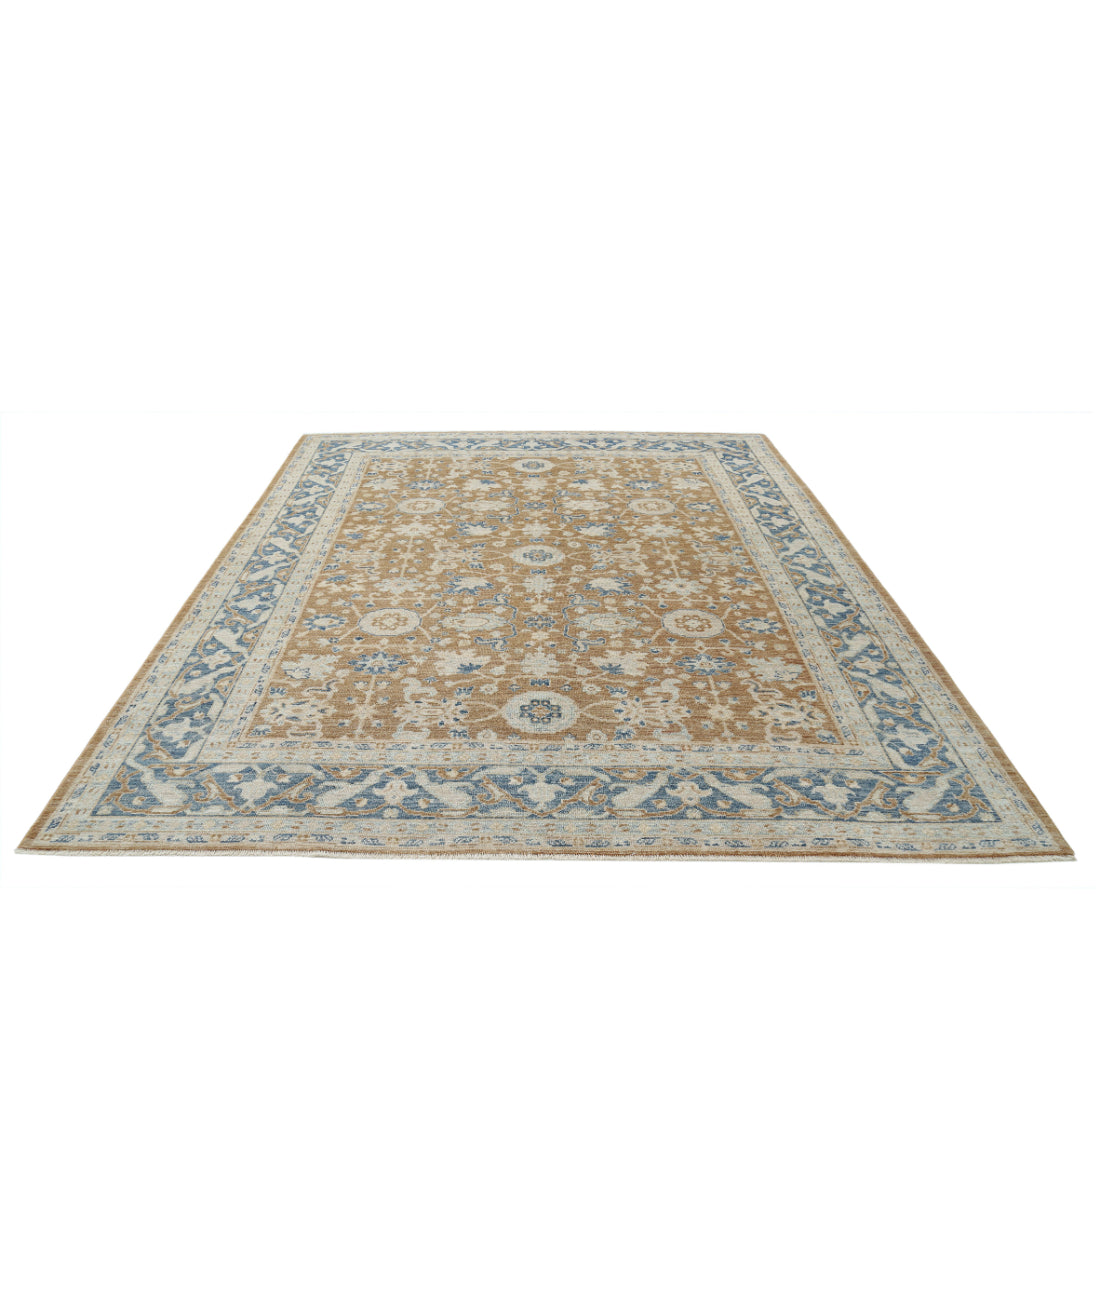 Hand Knotted Oushak Wool Rug - 8'8'' x 10'4'' 8'8'' x 10'4'' (260 X 310) / Brown / Blue